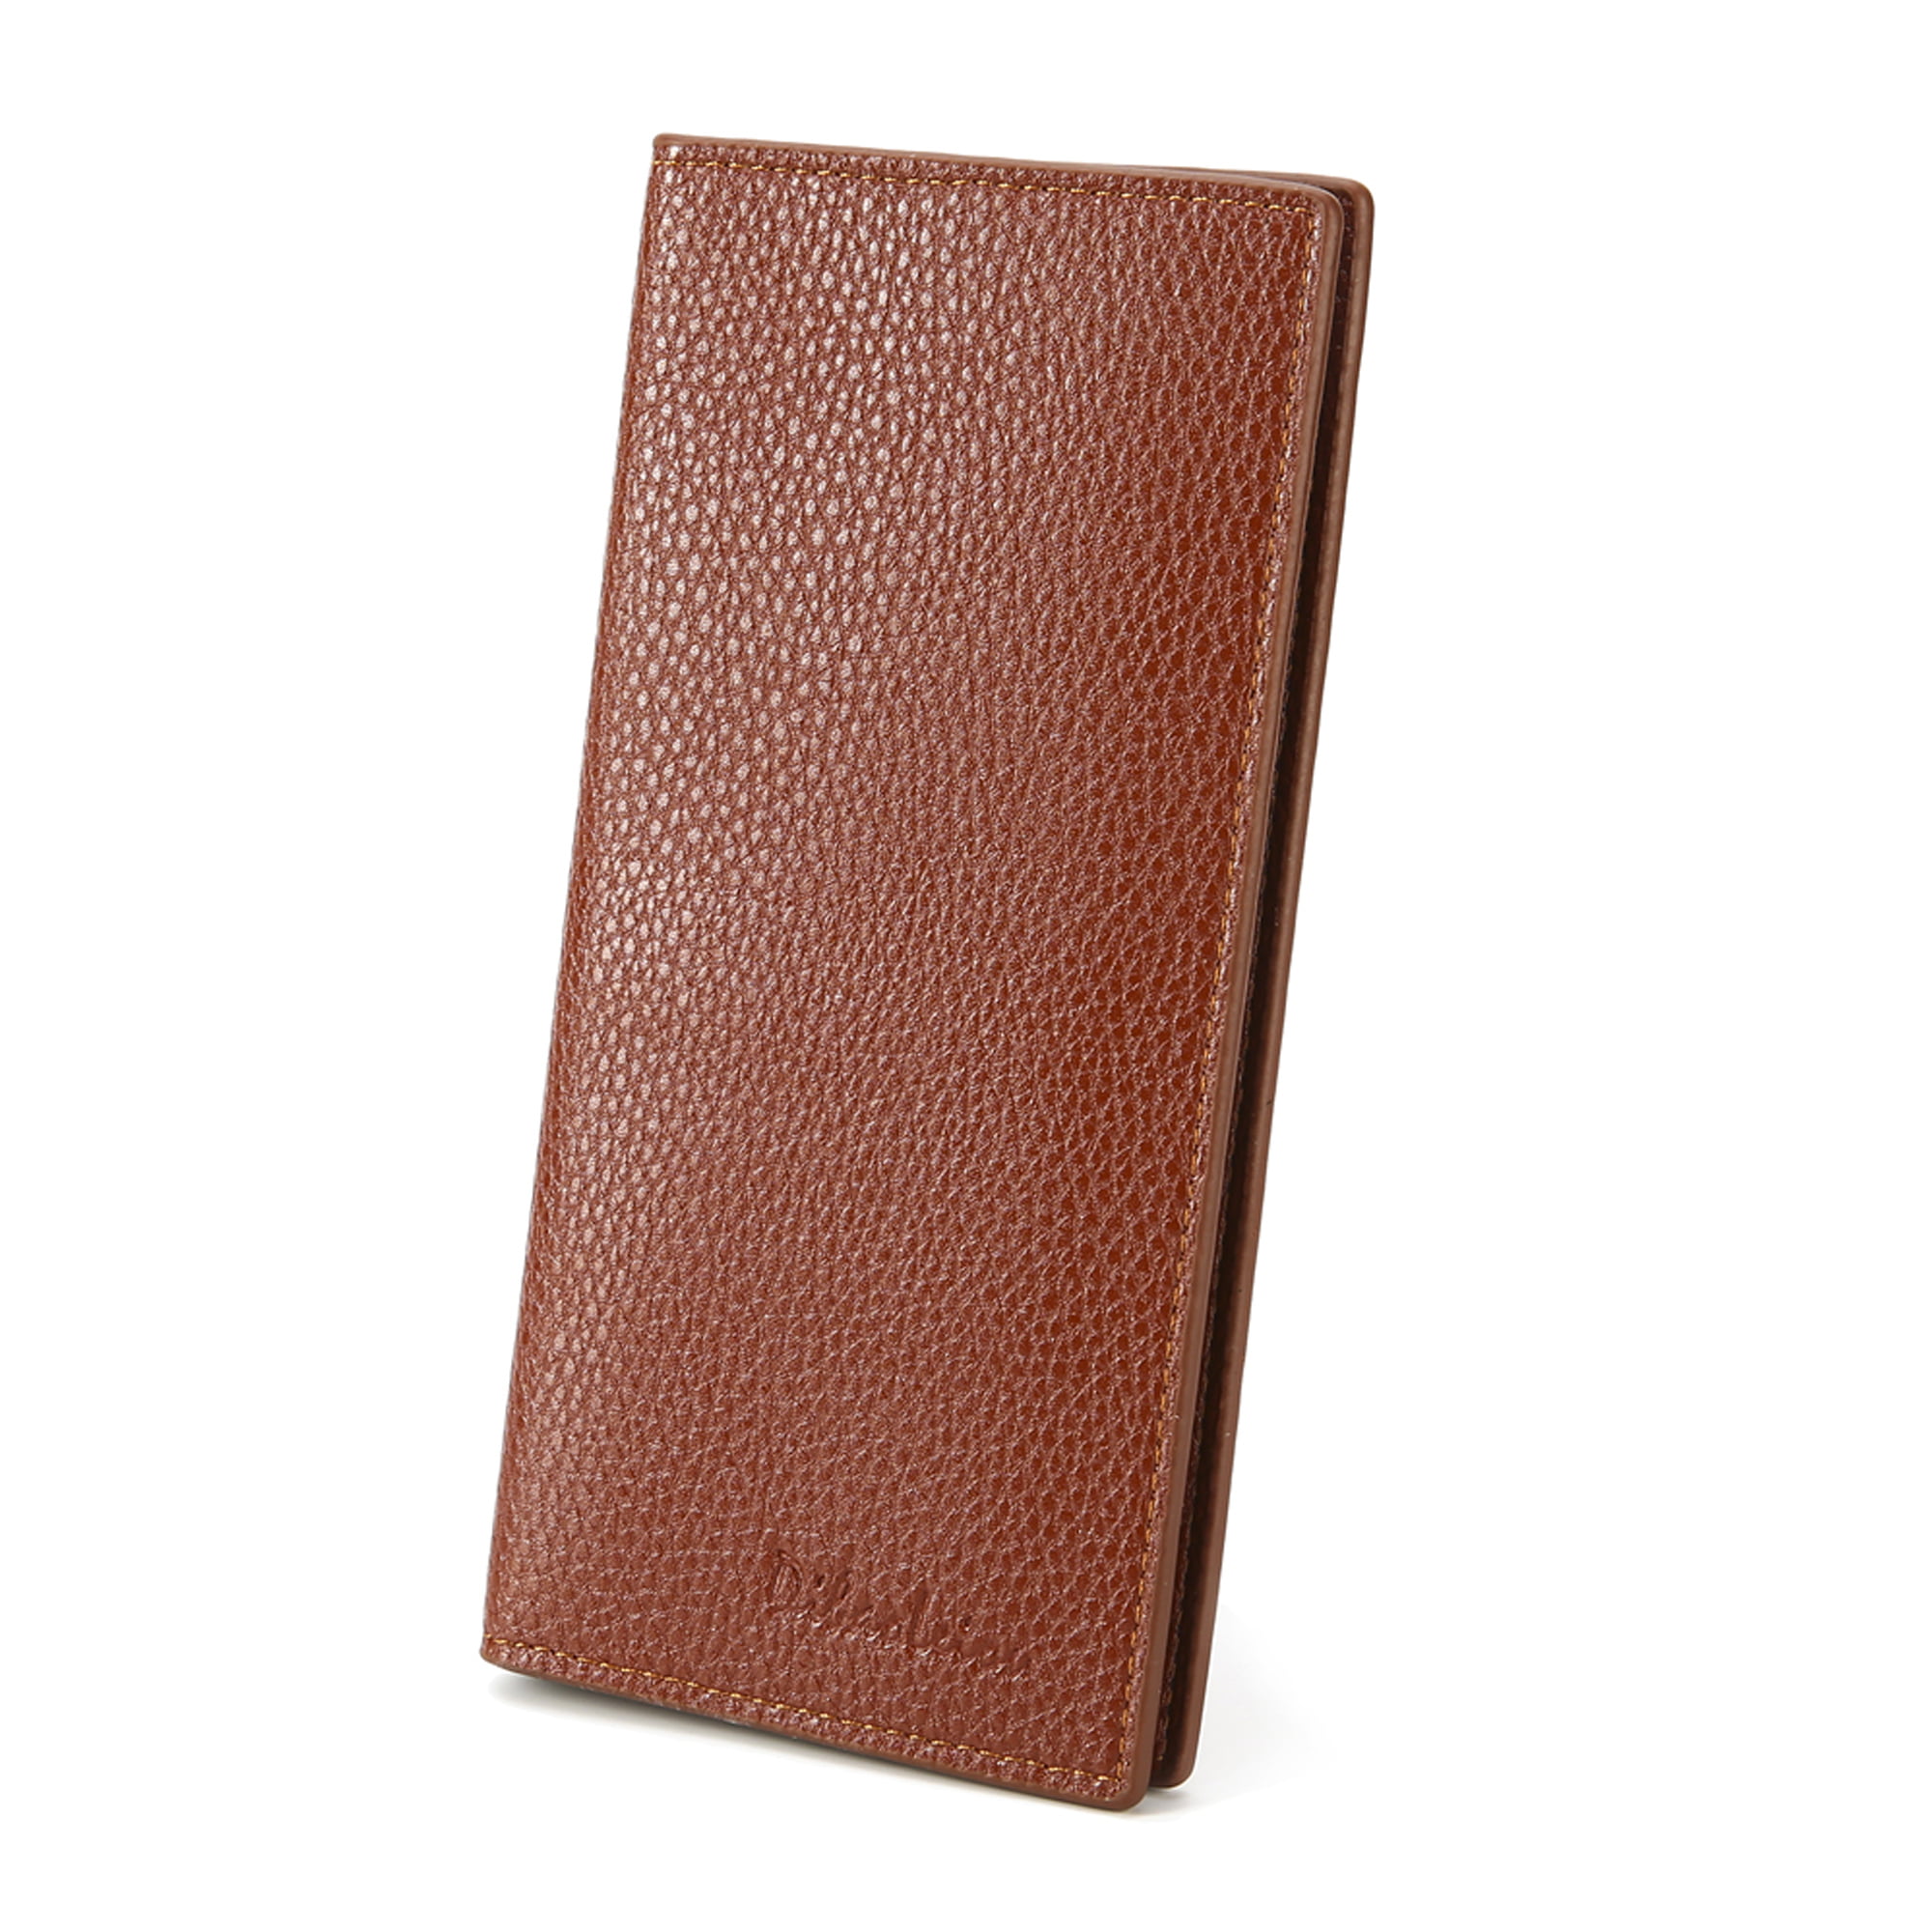 Classic Luxury Designer Long Wallet Mens Womens Leather PVC Business Credit Card  Holder Mens Purse Brown 6660110 From Keke_520, $36.72